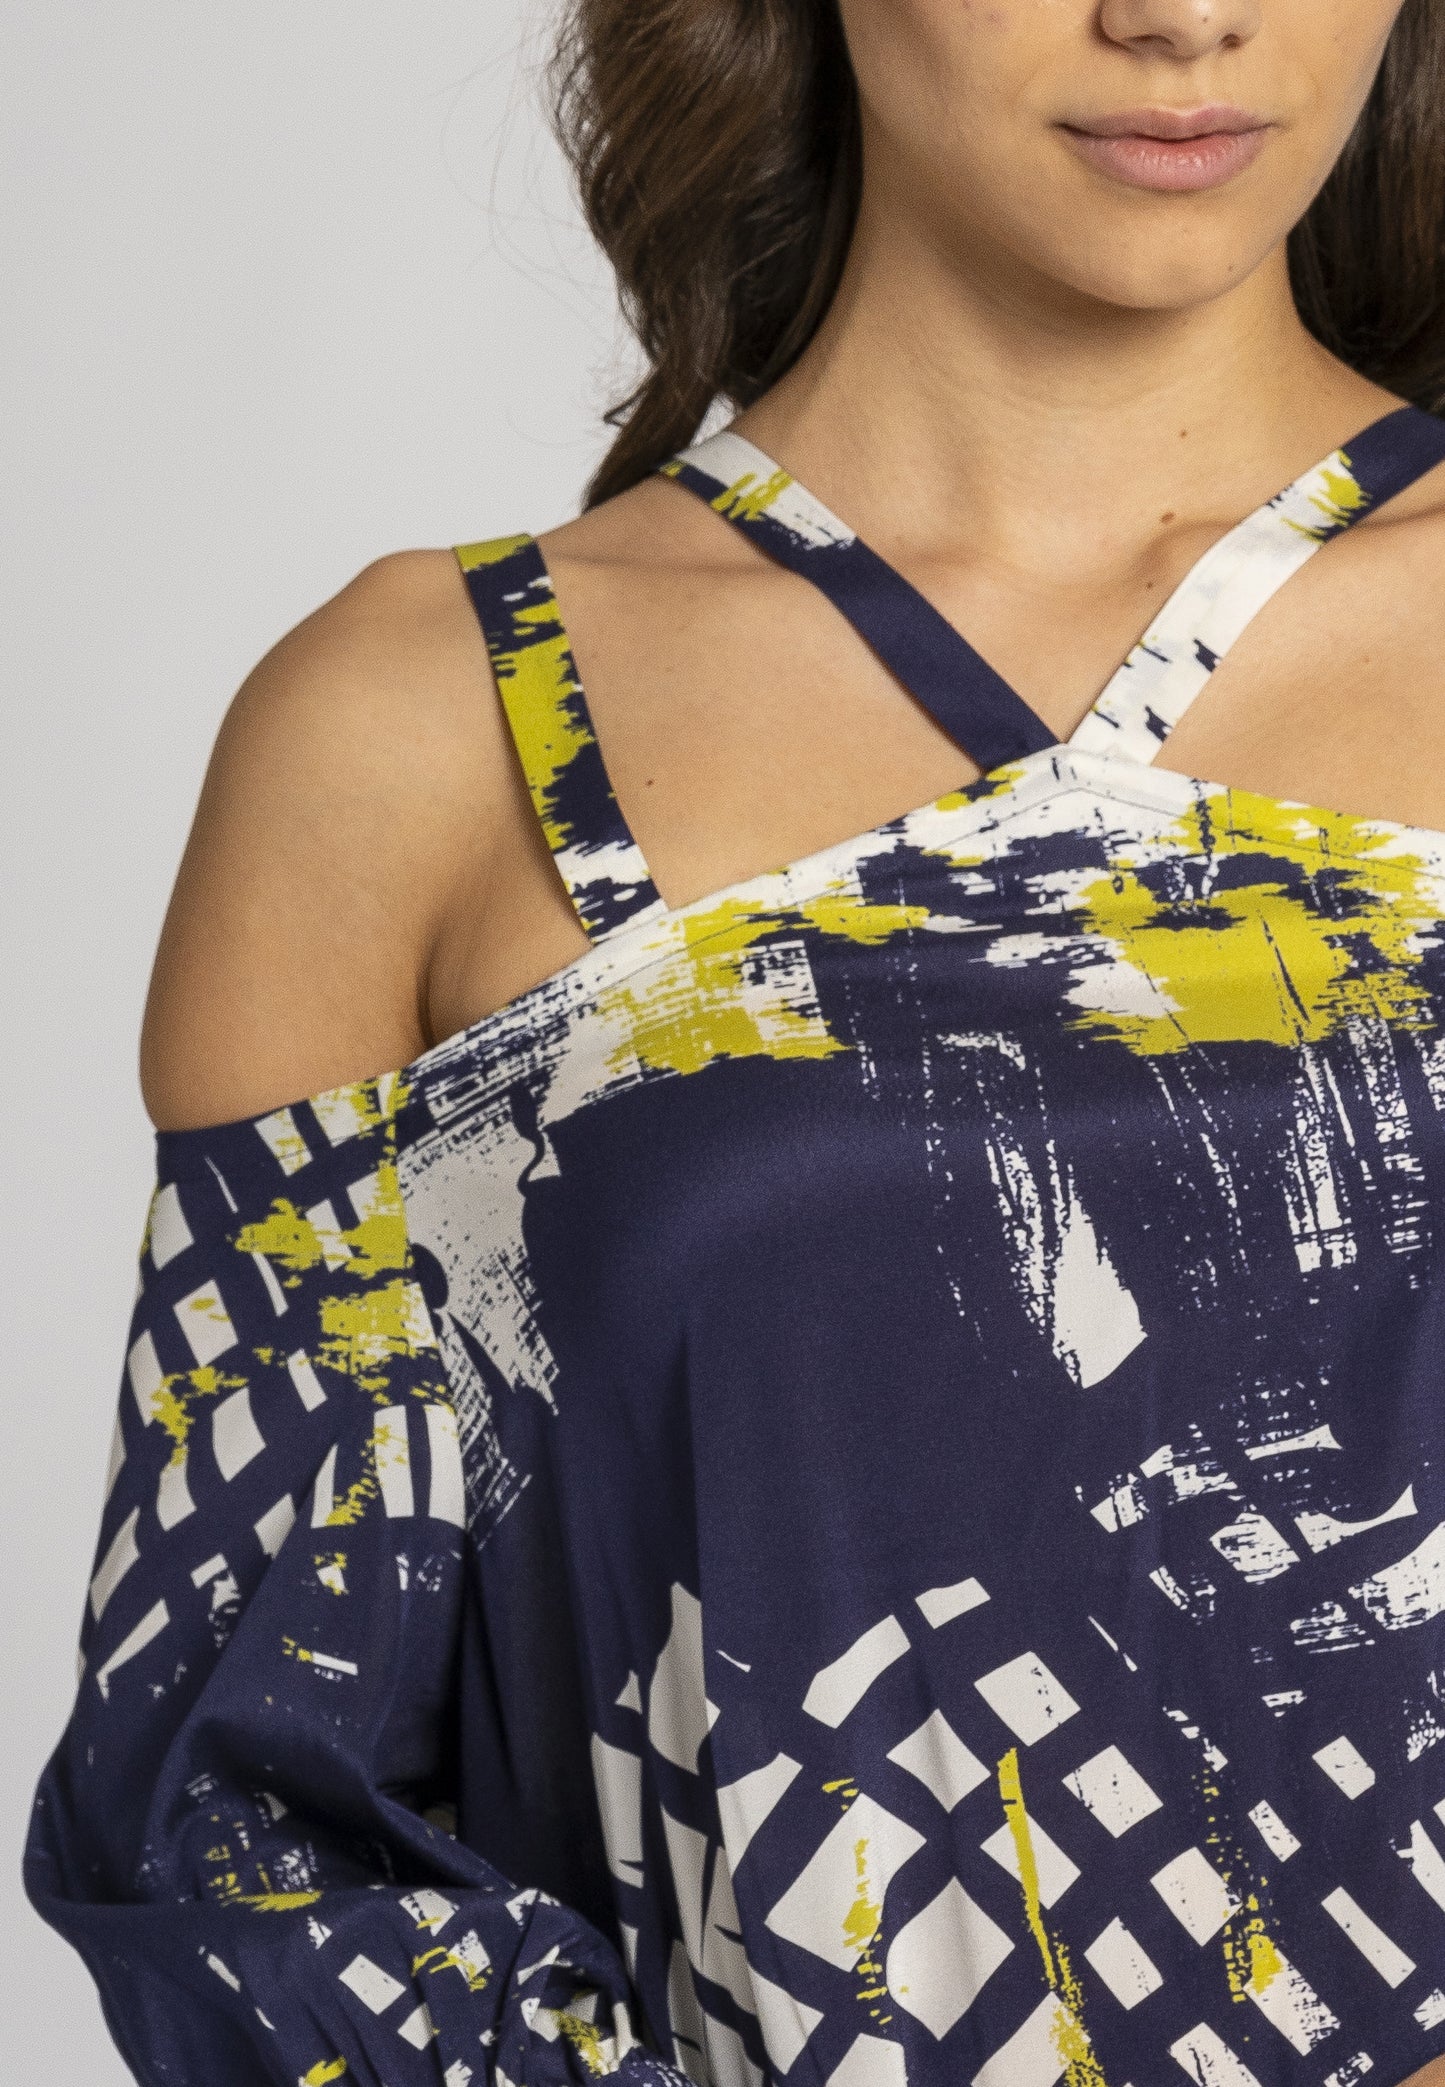 Gelsomino Kaftan Top - Oversized Printed Silk Kaftan with Unique Strap Design and Asymmetrical Length